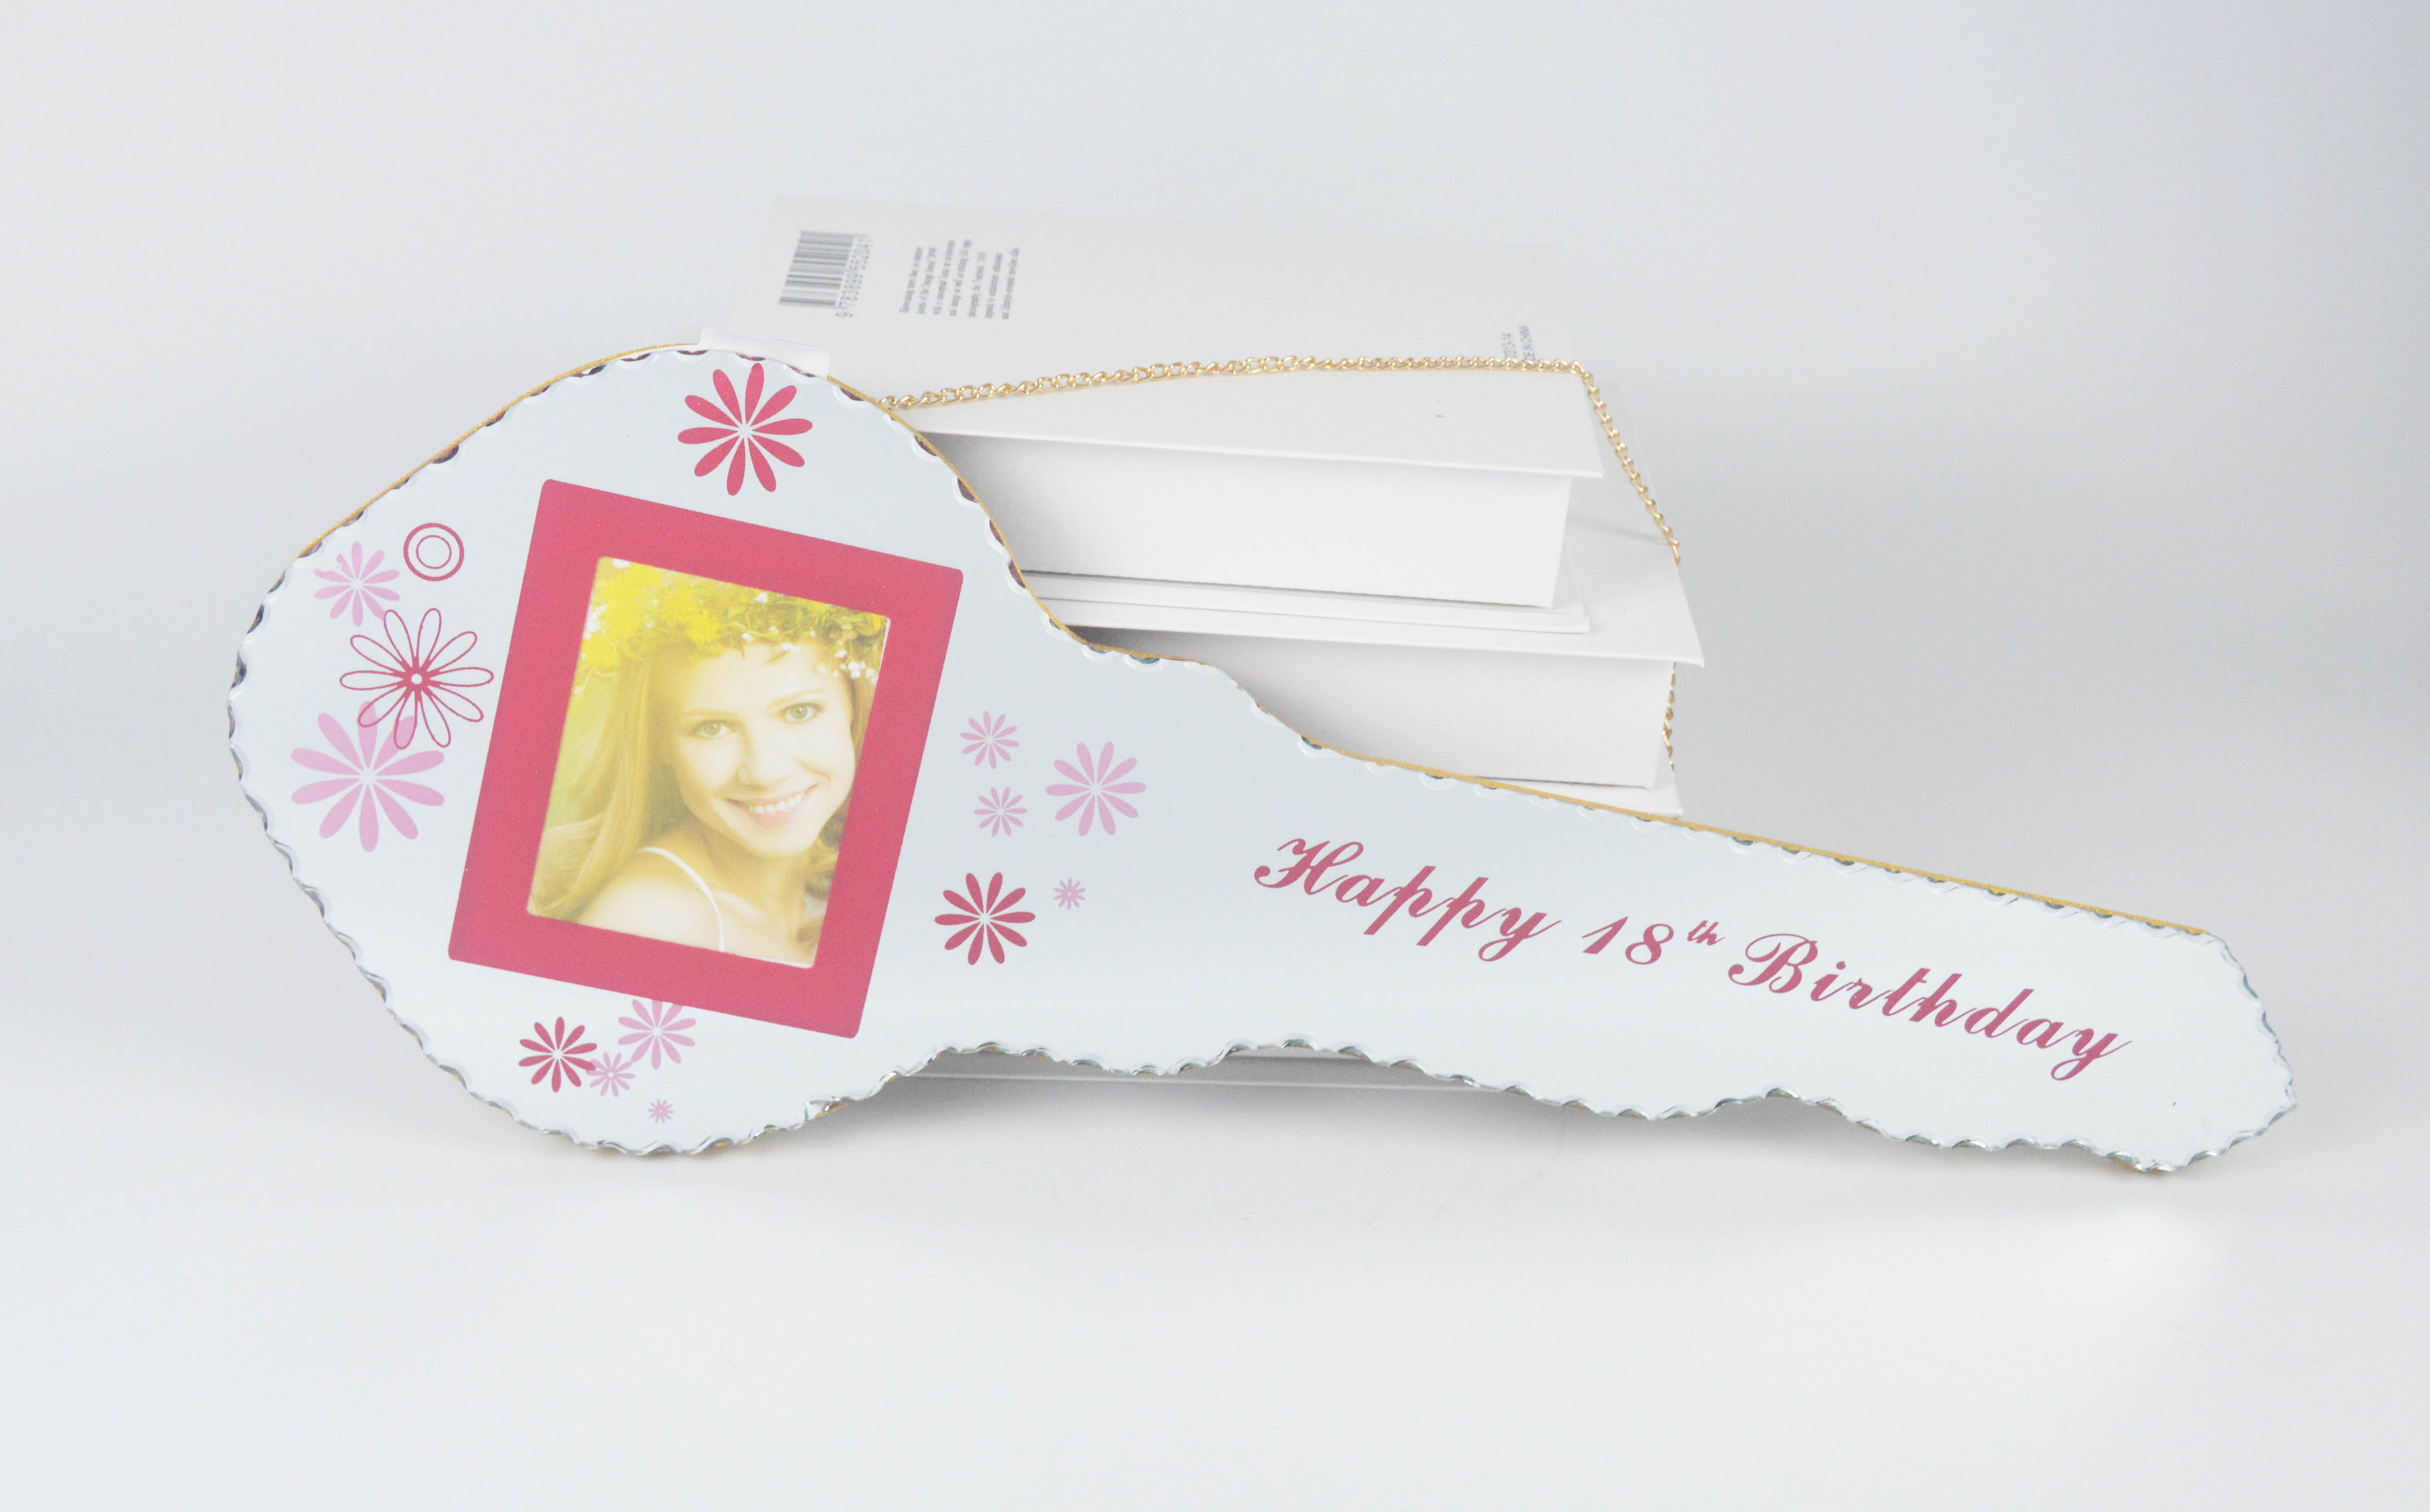 Happy 18th birthday 4x6" mirror glass key picture frame mix wooden in golden glitter powder circle edge for girls